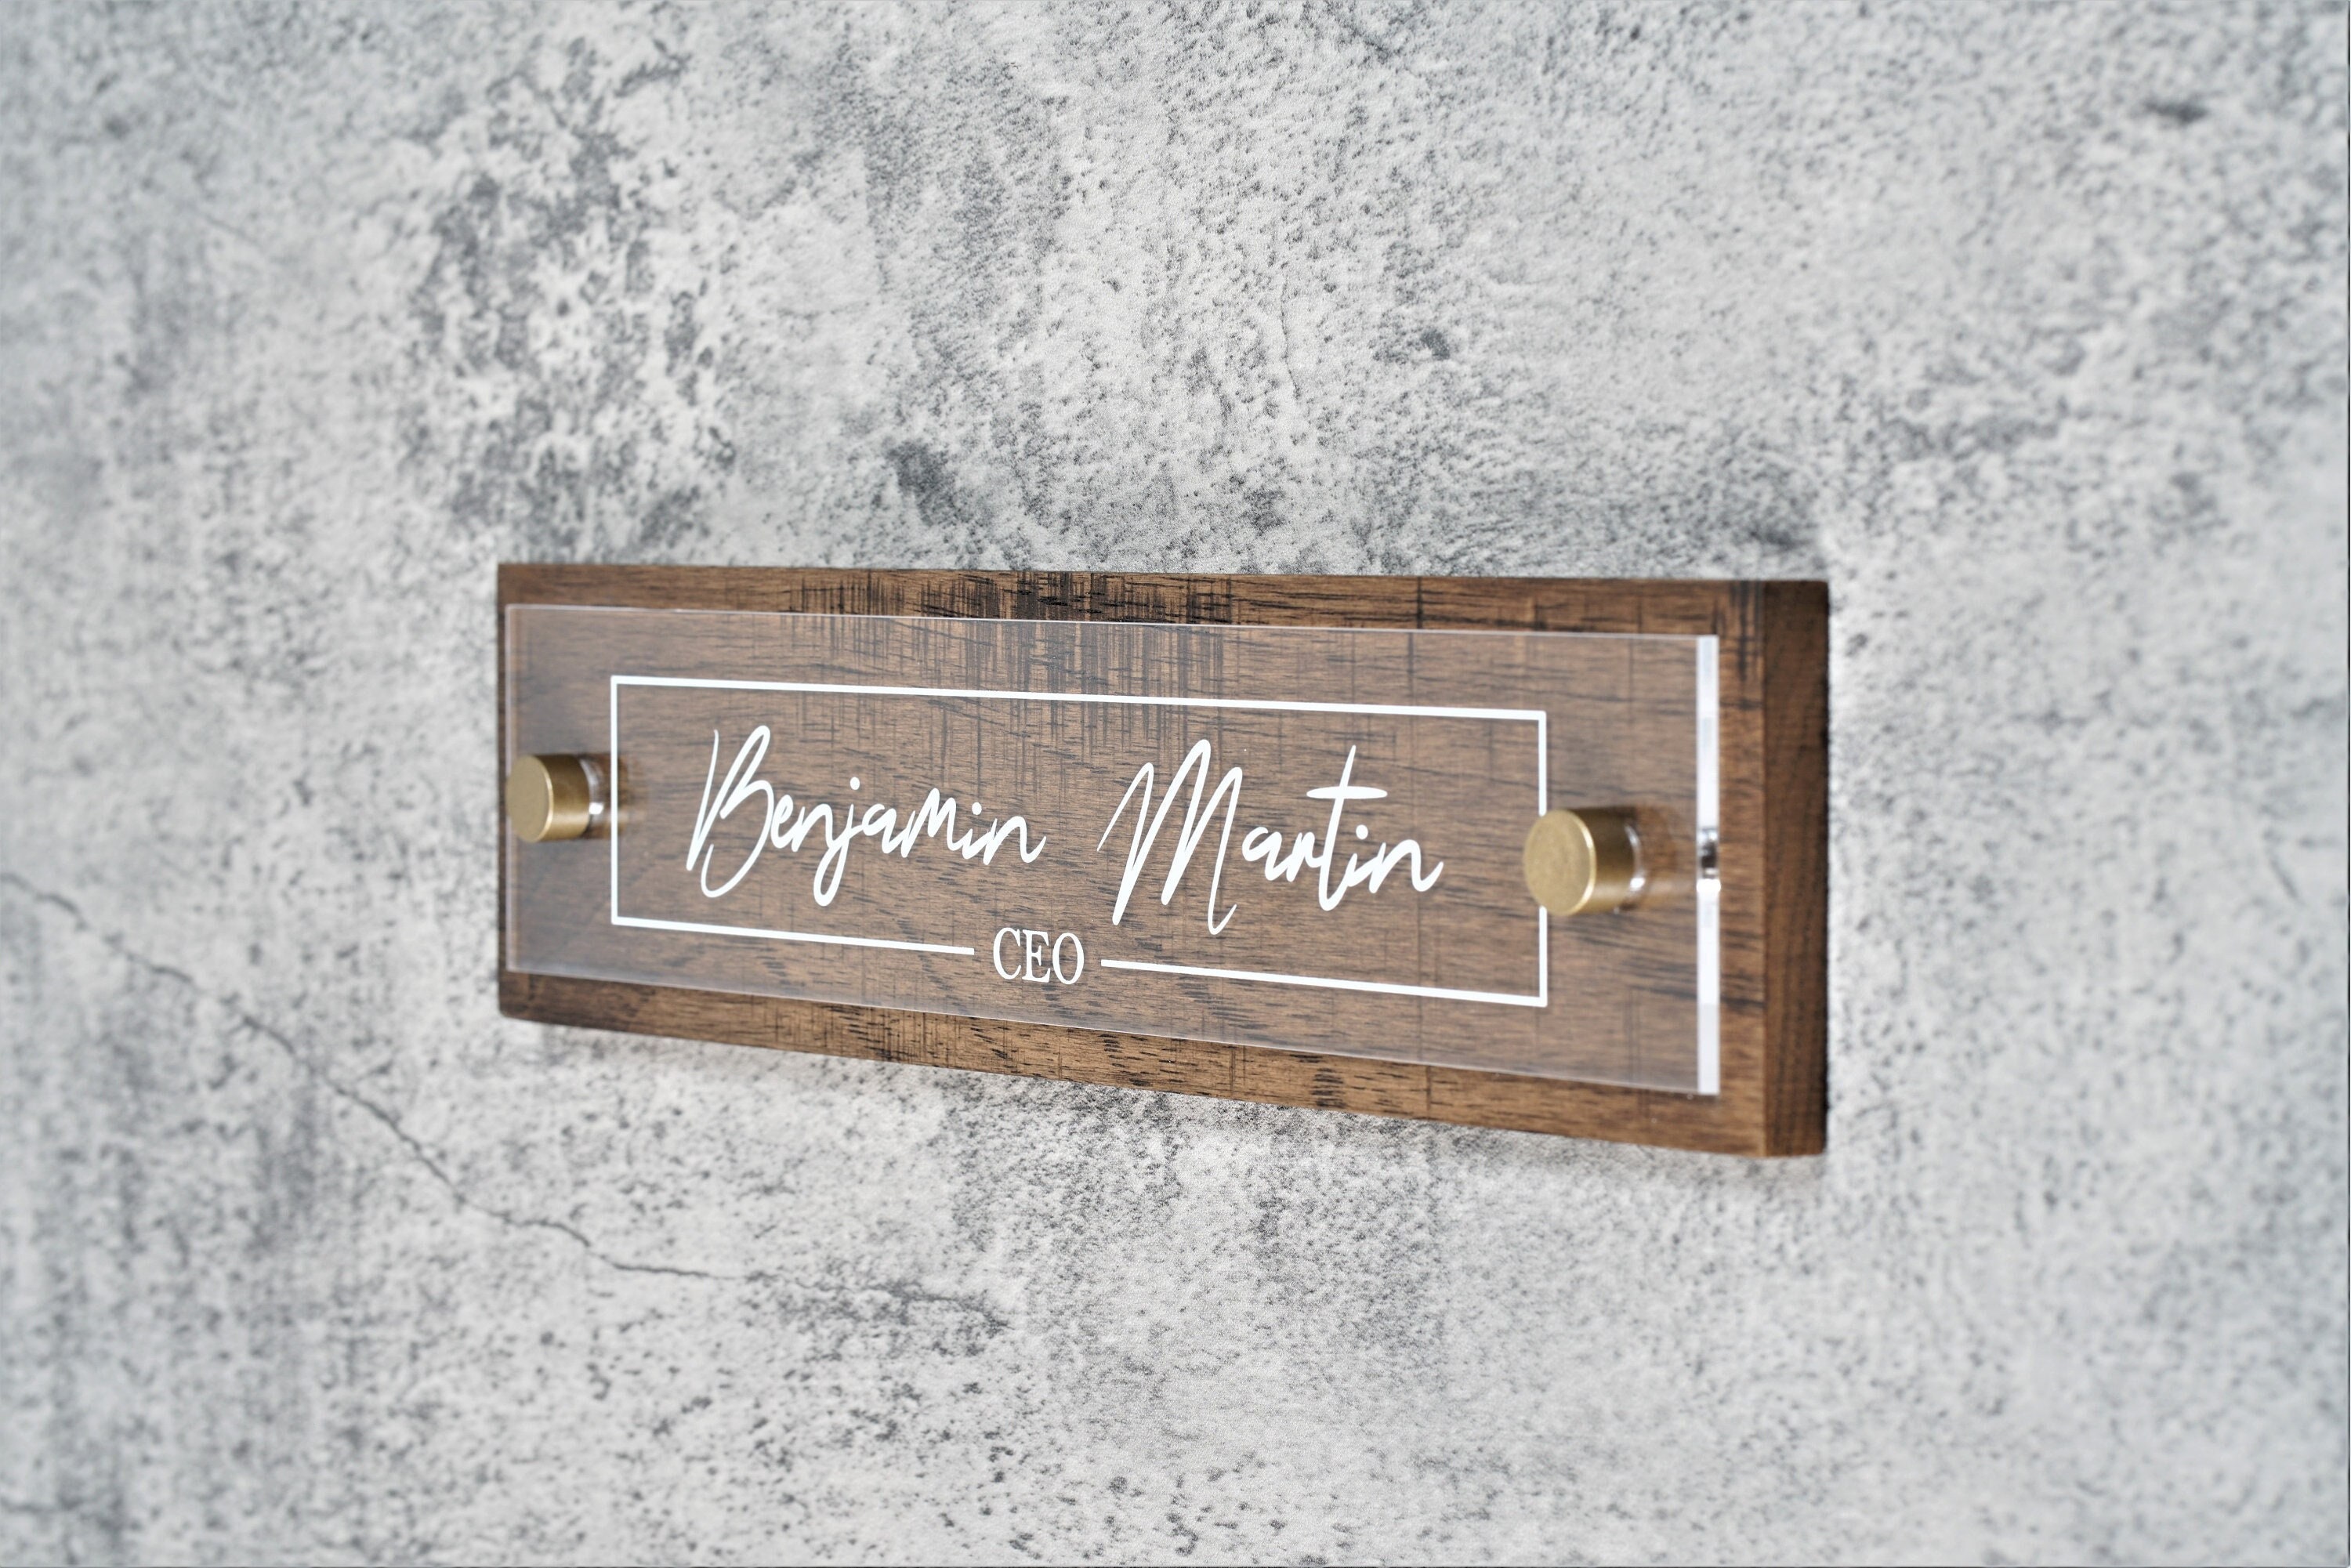 Rustic Wall & Door Flush Mount Name Plate. Made Exclusively by